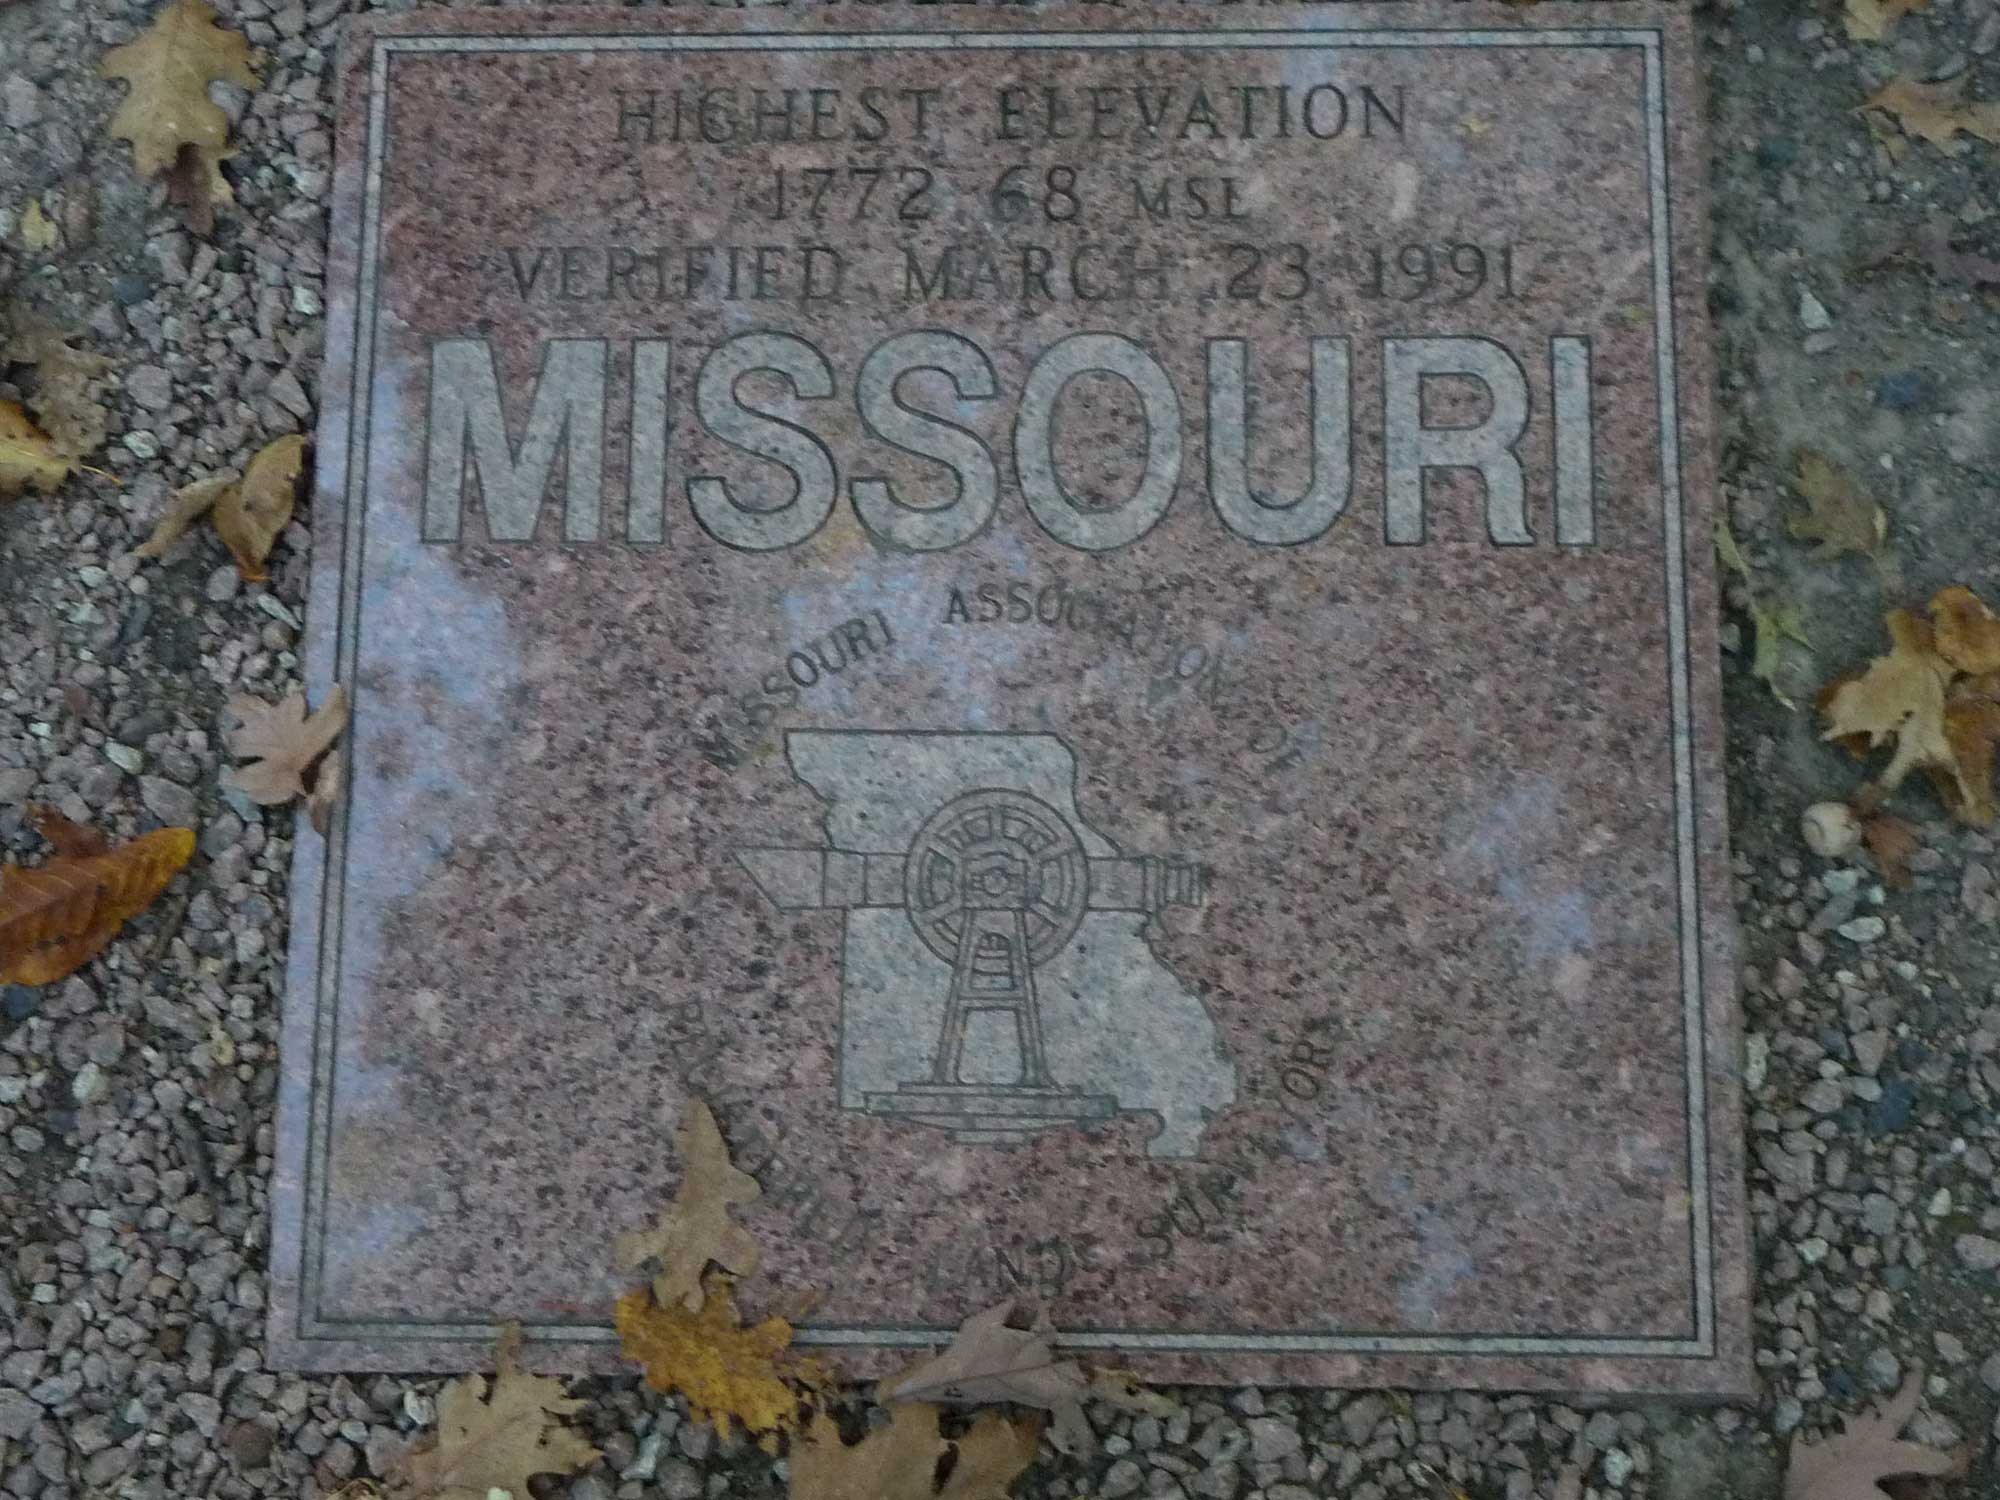 Photograph of a marker sign that indicates the point of highest elevation in Missouri.